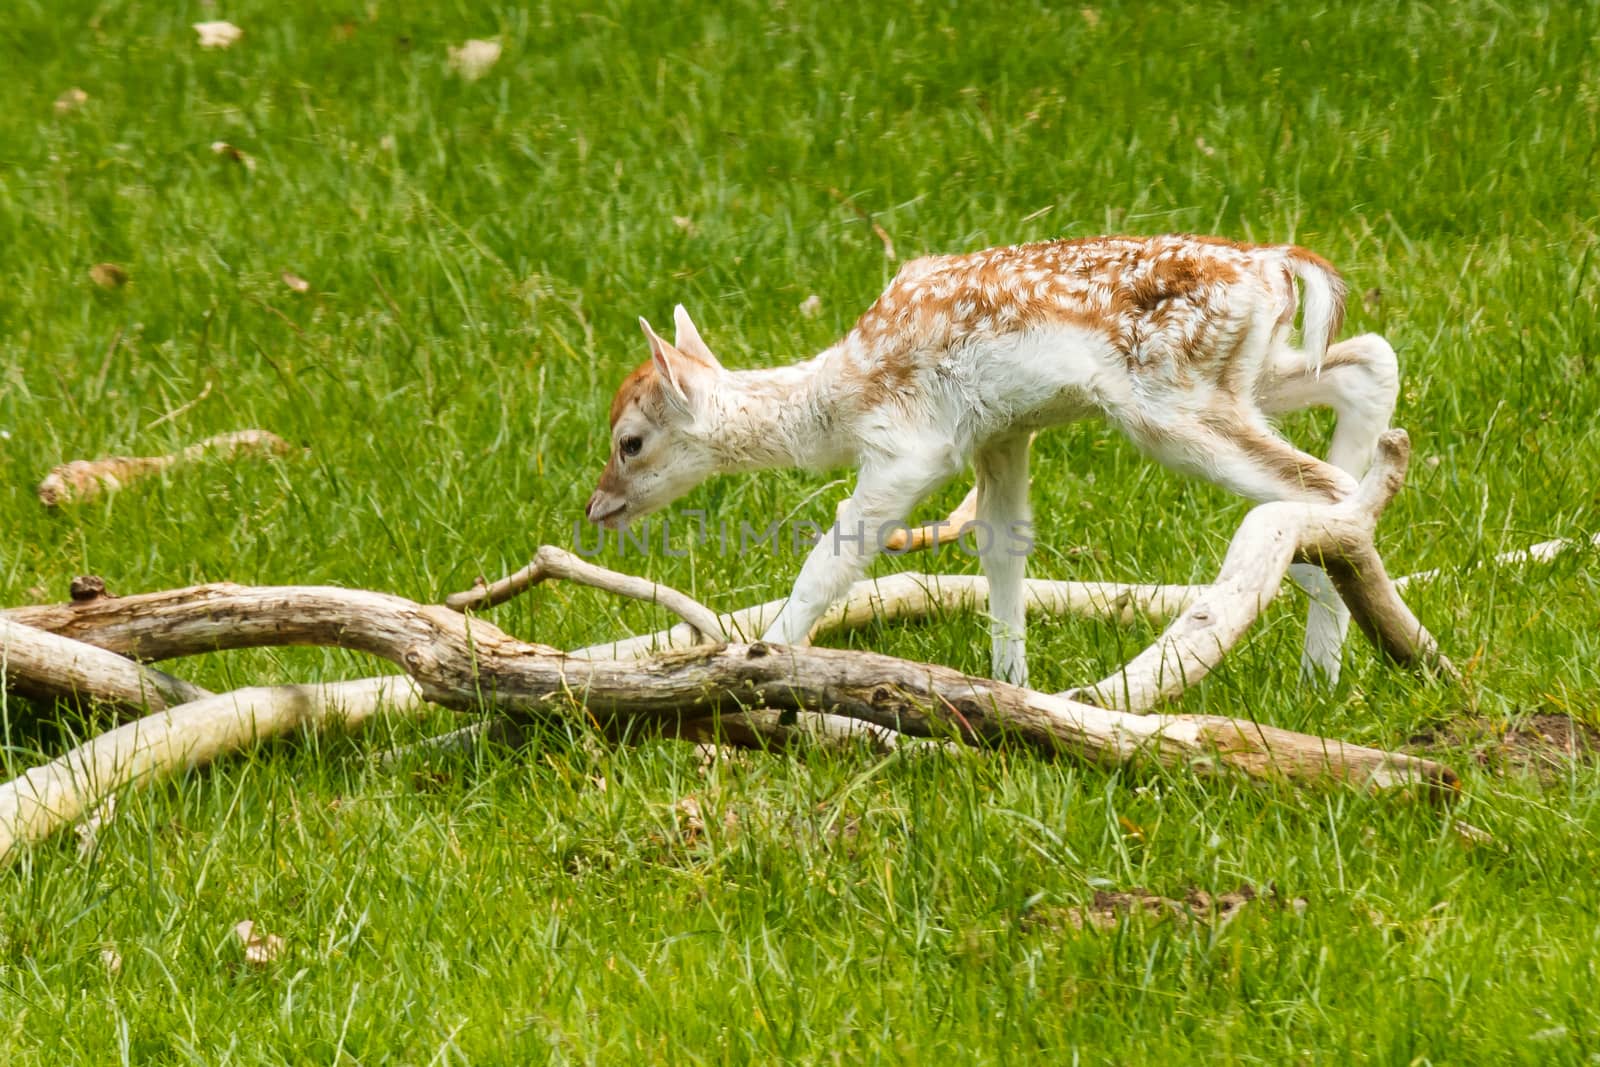 Youn deer playing around with some falling branches in a meadow